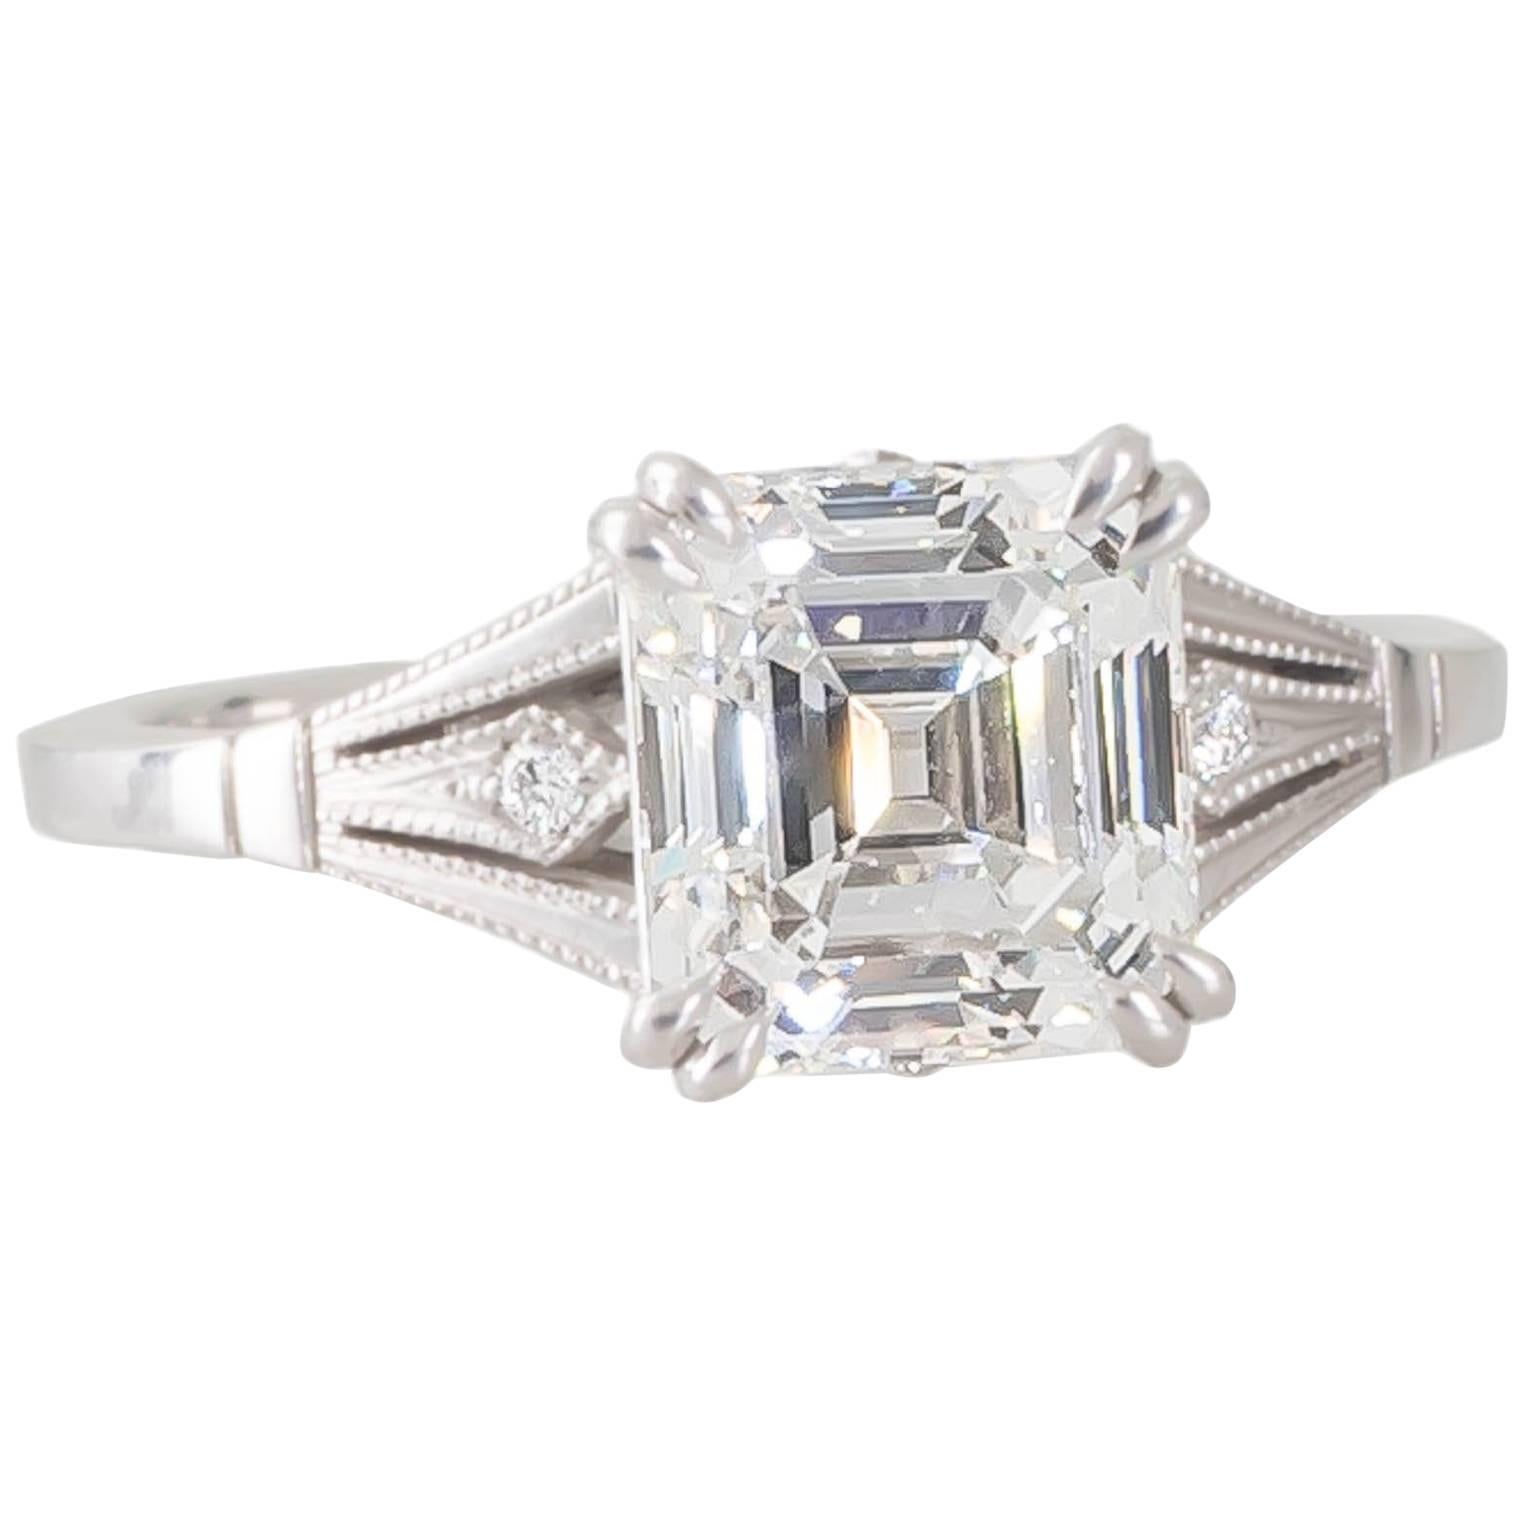 2.23 Carat GIA Certified Asscher Cut Diamond White Gold Ring For Sale